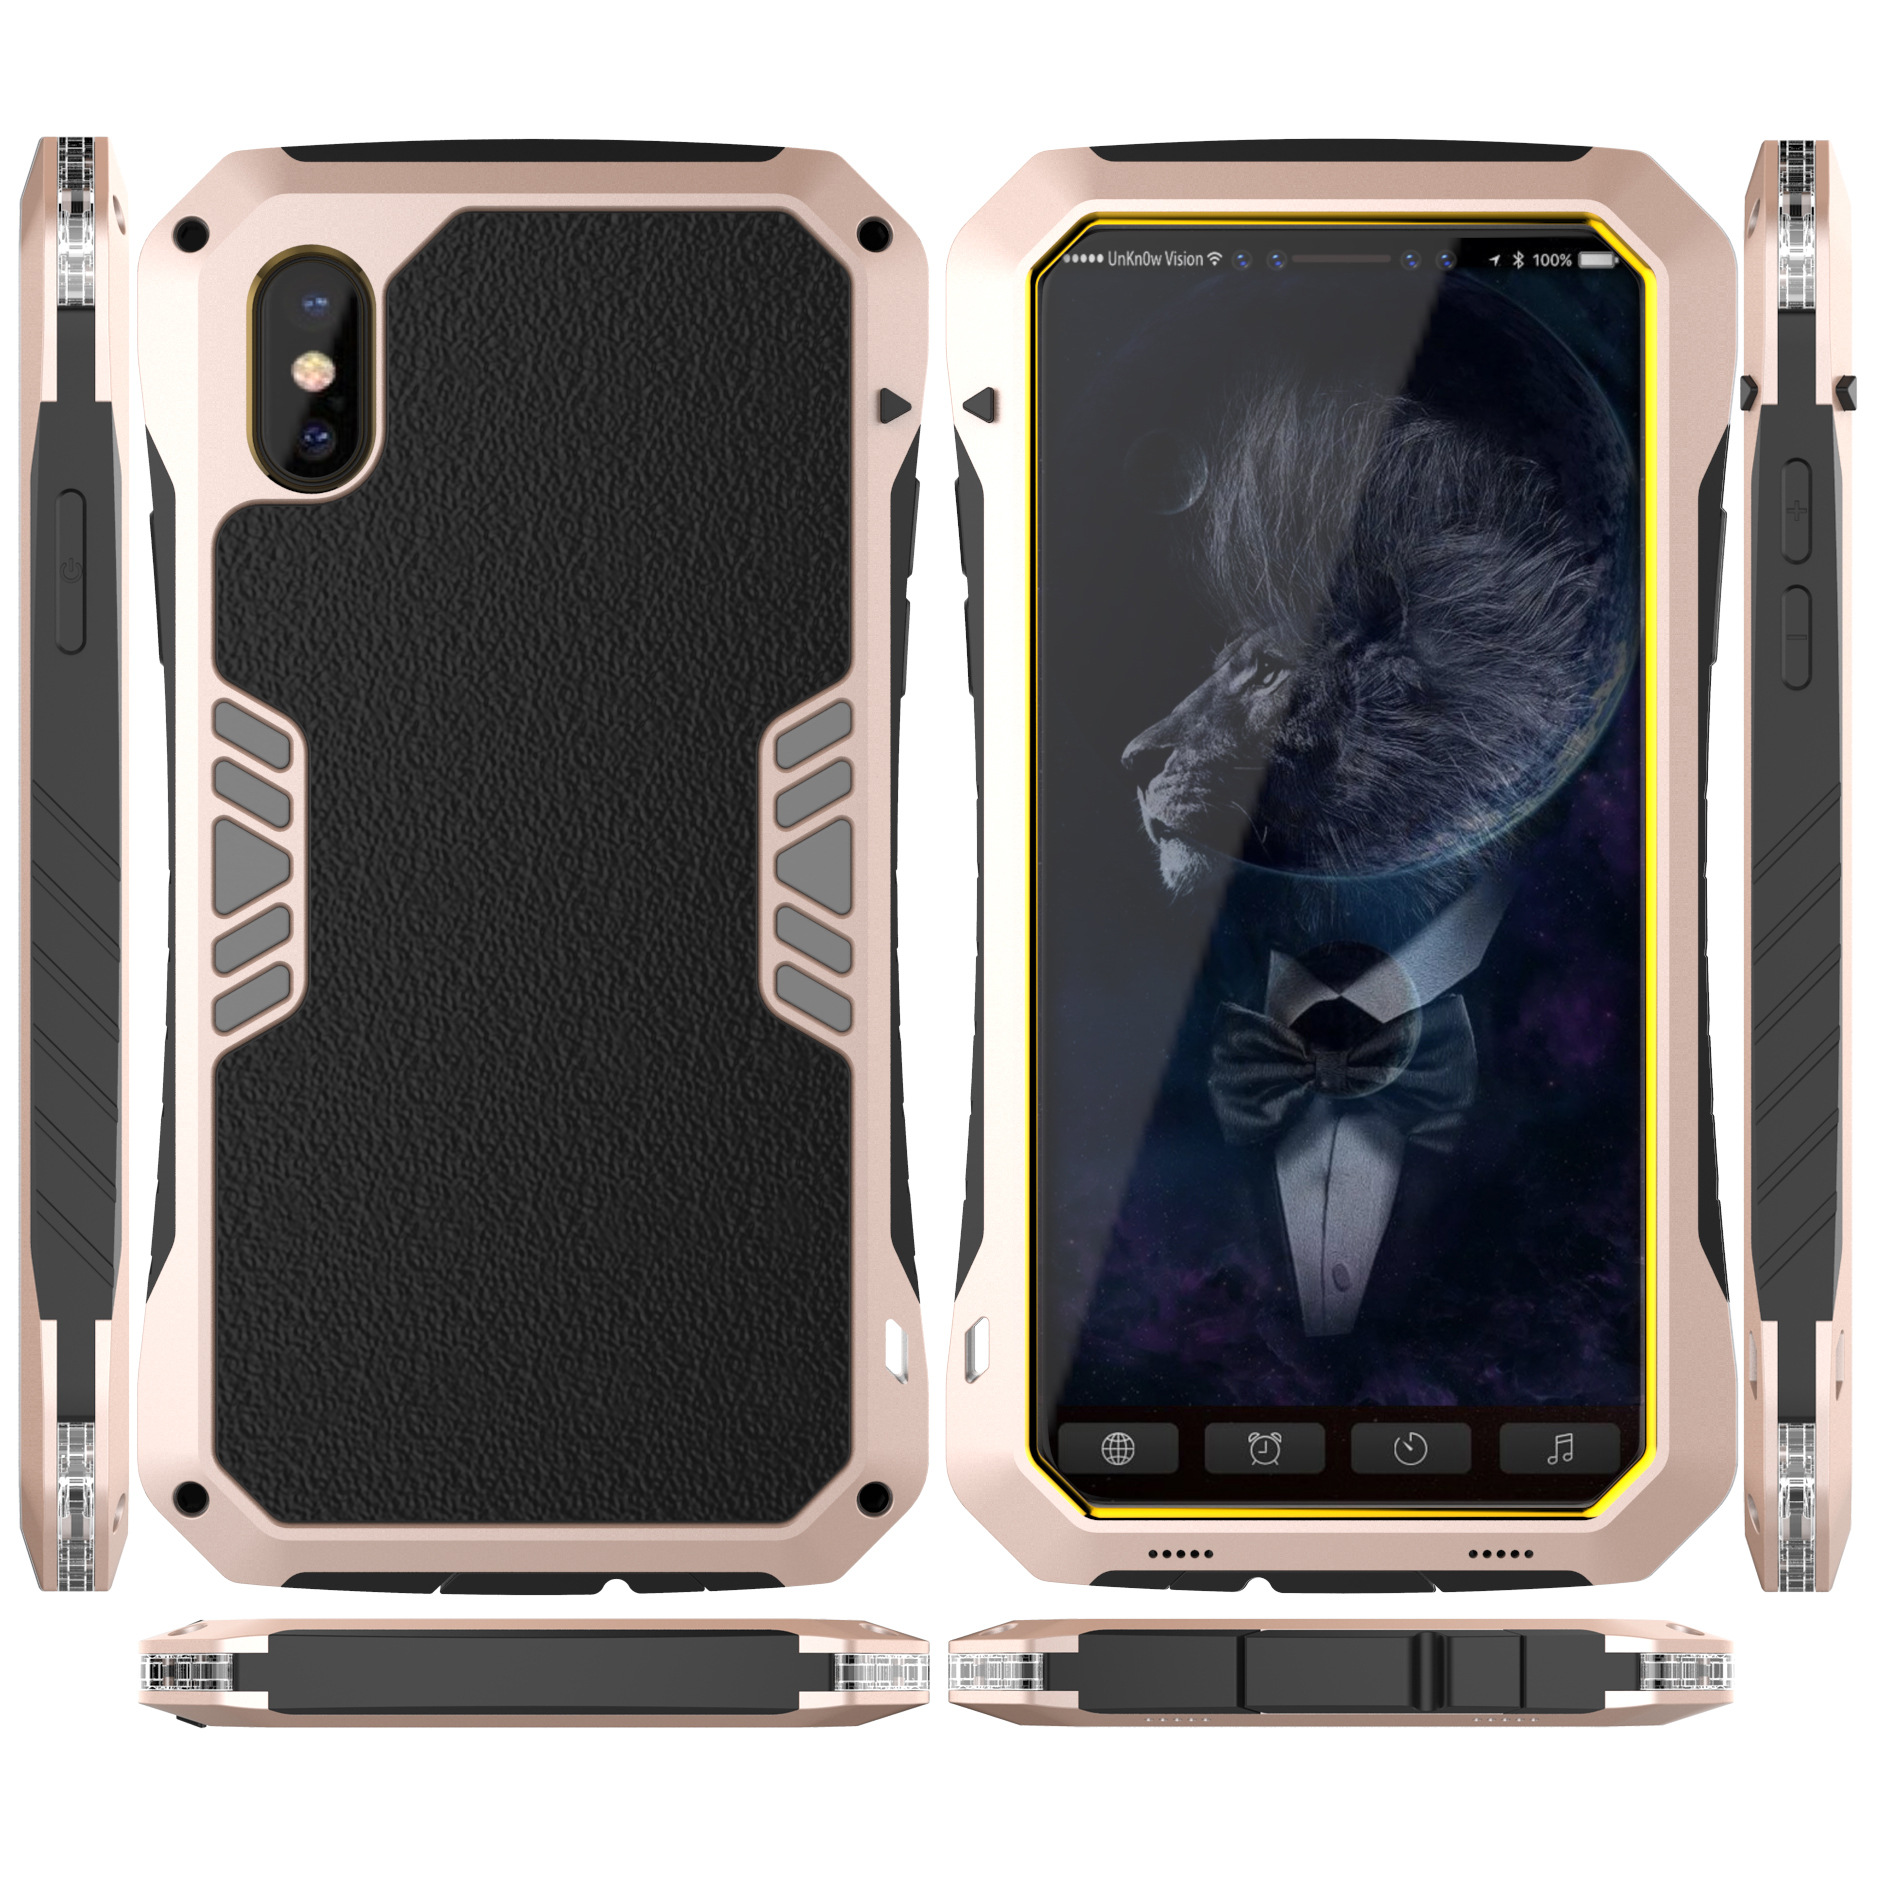 Luphie Armored Knight Bicolor Aluminum Metal Bumper + Shockproof Silicone Triple Protection Case Cover for Apple iPhone X